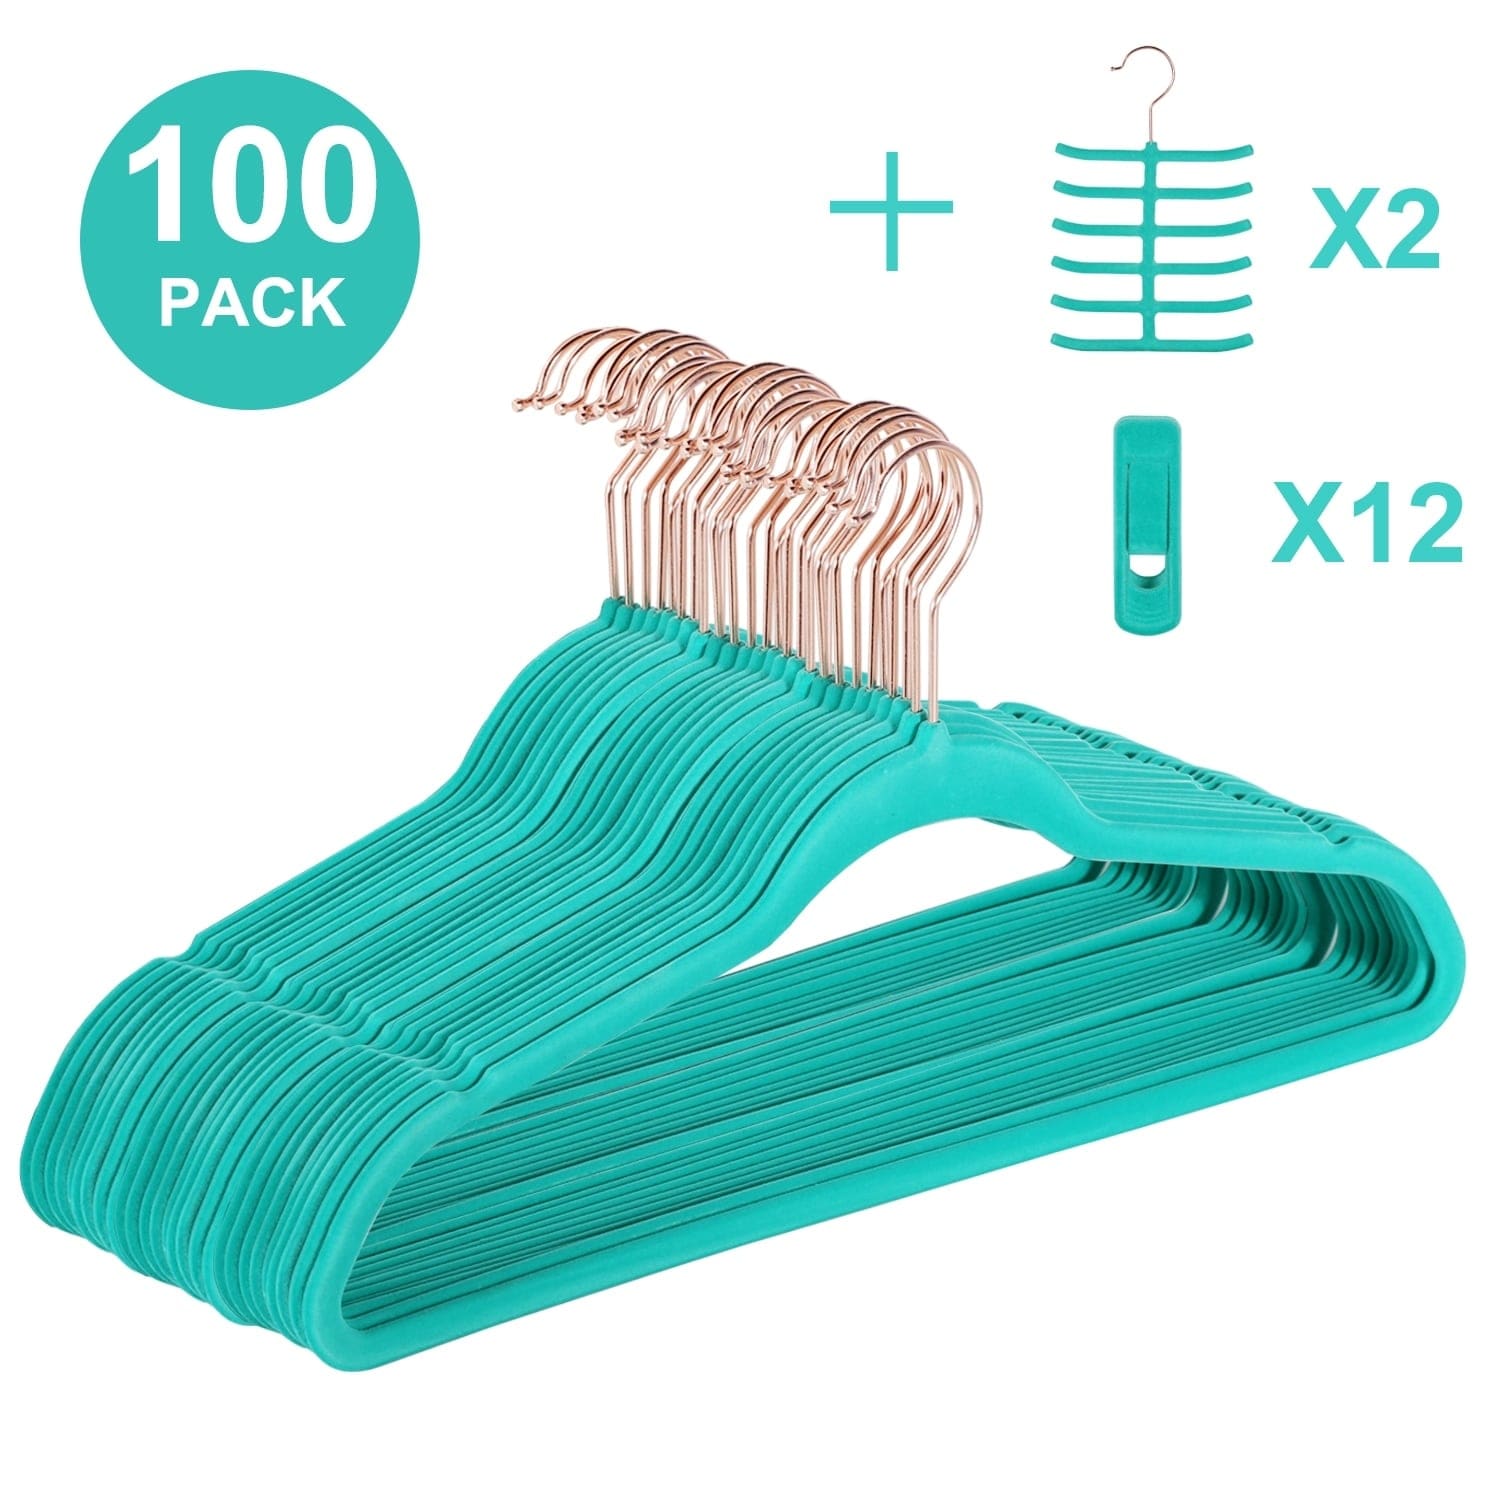 https://ak1.ostkcdn.com/images/products/is/images/direct/7a9aa35e51ad0e0124362186b91d1a76f669d8ce/Premium-Space-Saving-Velvet-Hangers-Holds-Up-To-10-Lbs%2850-100-Packs-Option%29.jpg